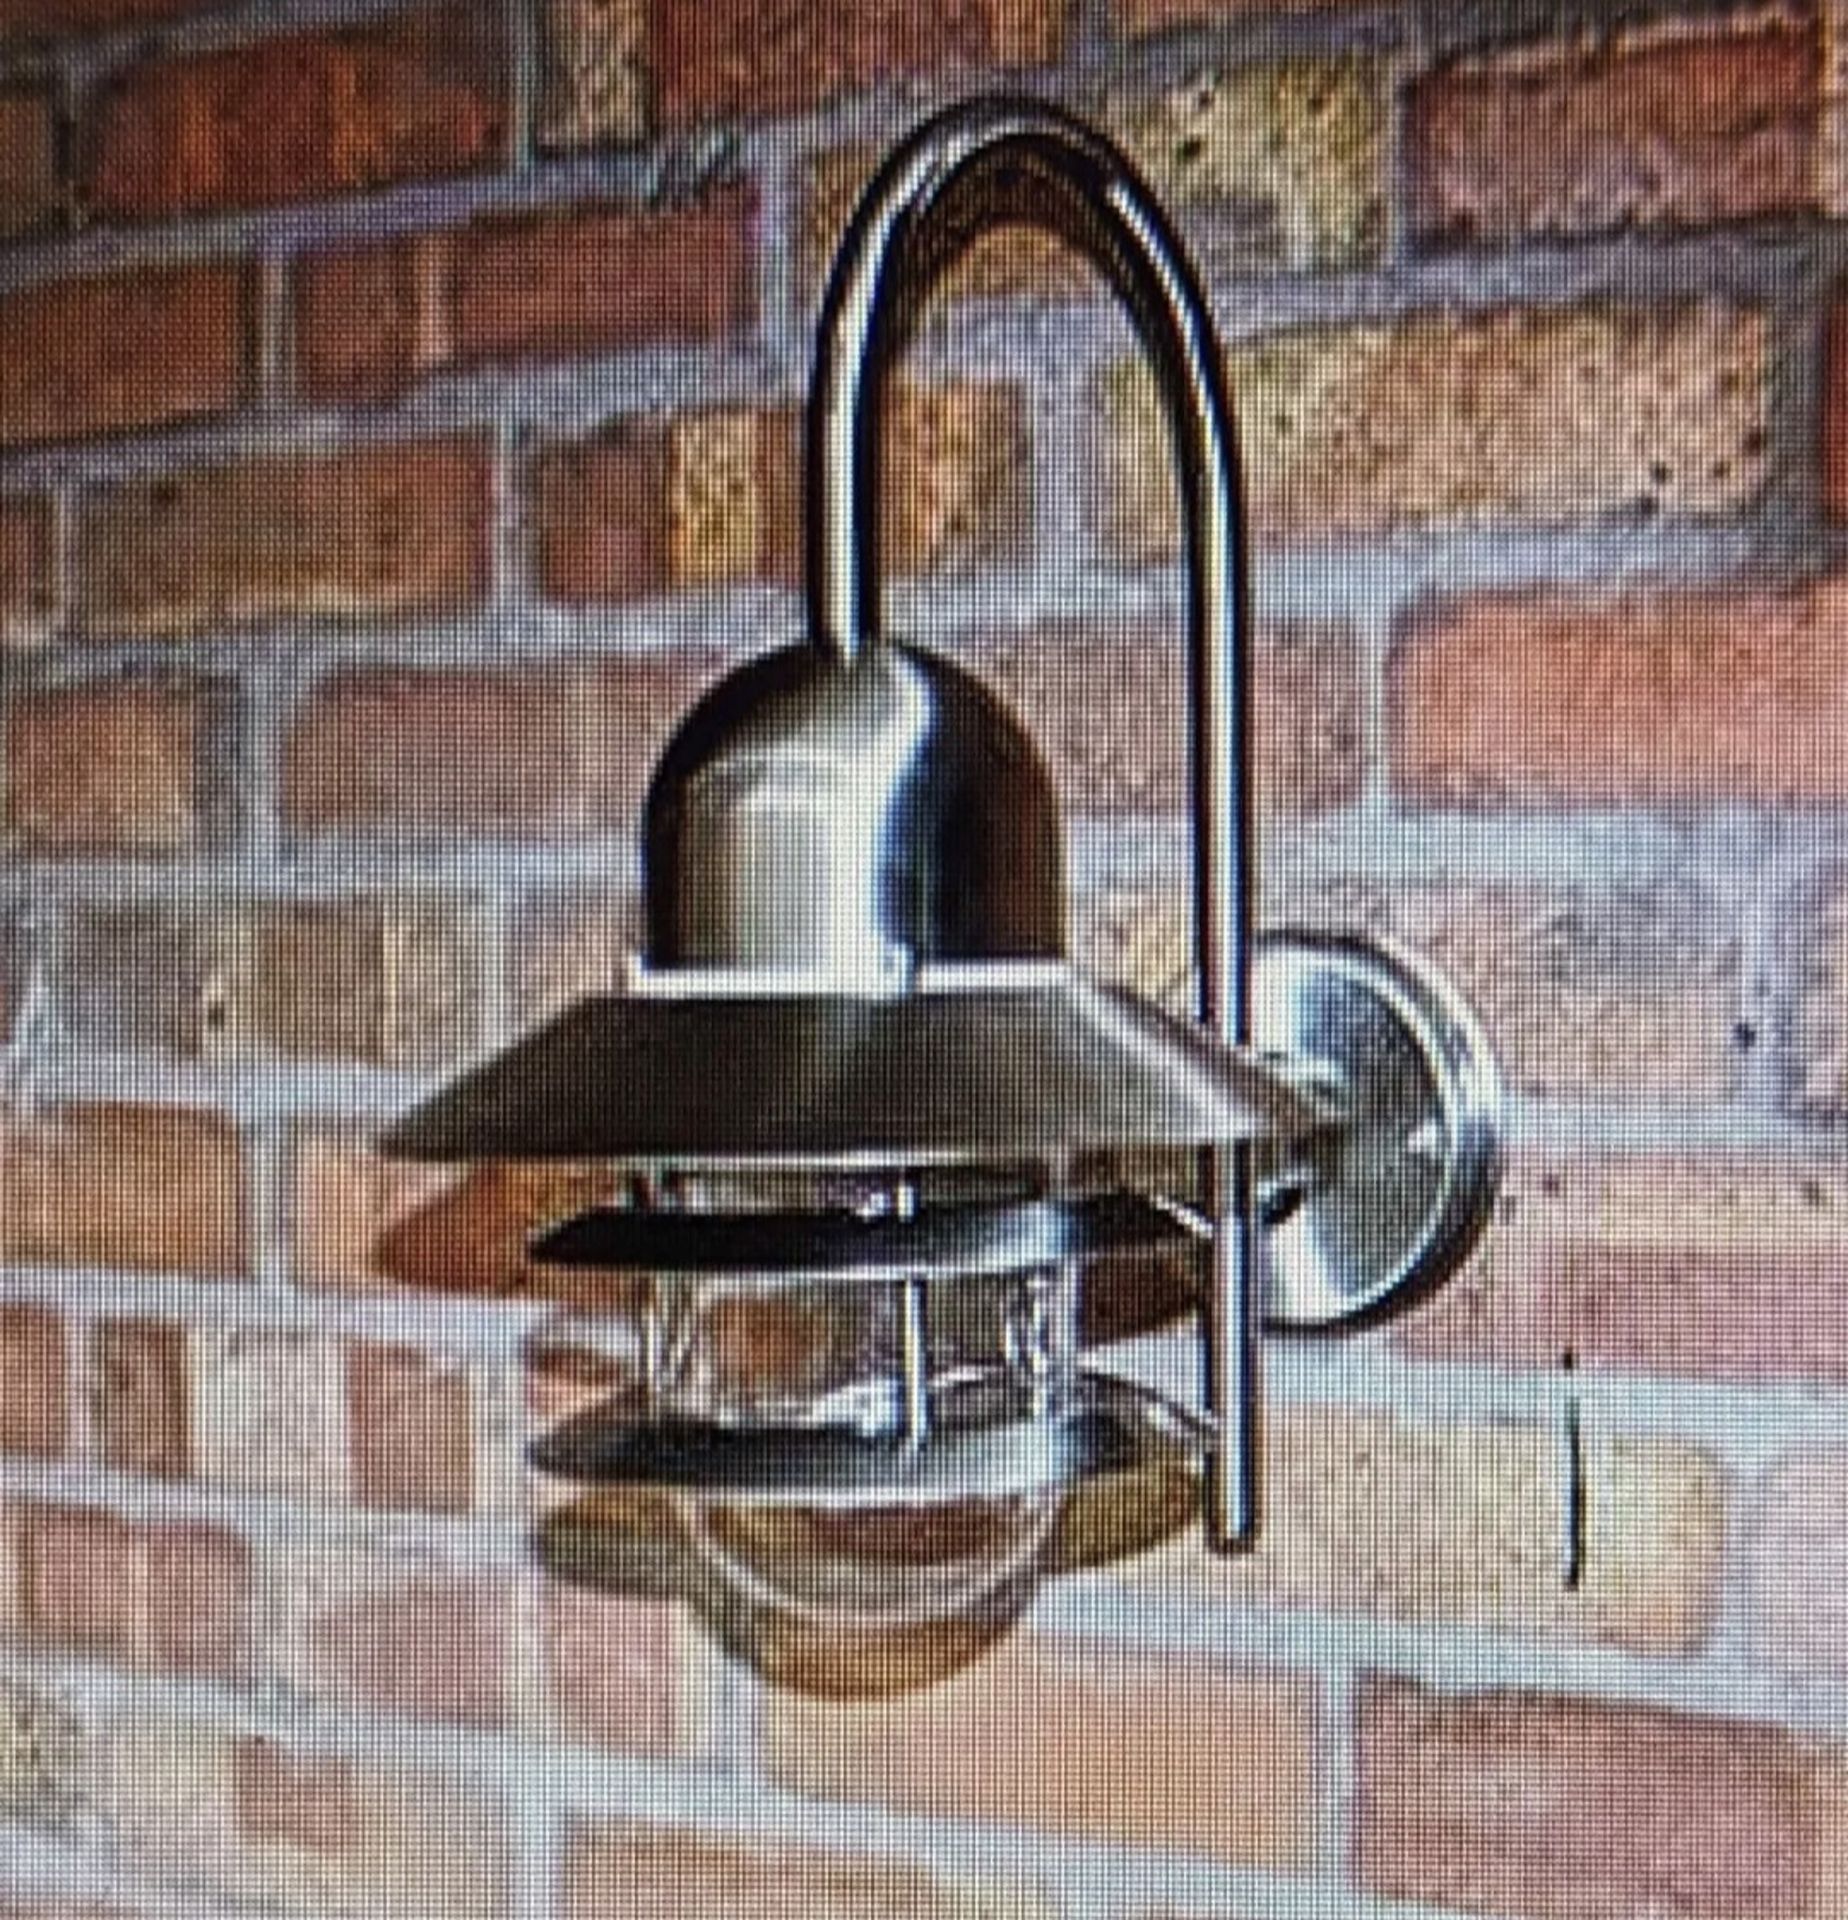 2 x The Malaga stainless steel wall-mounted lantern (suitable for external use) 240v/50Hz, - Image 2 of 2